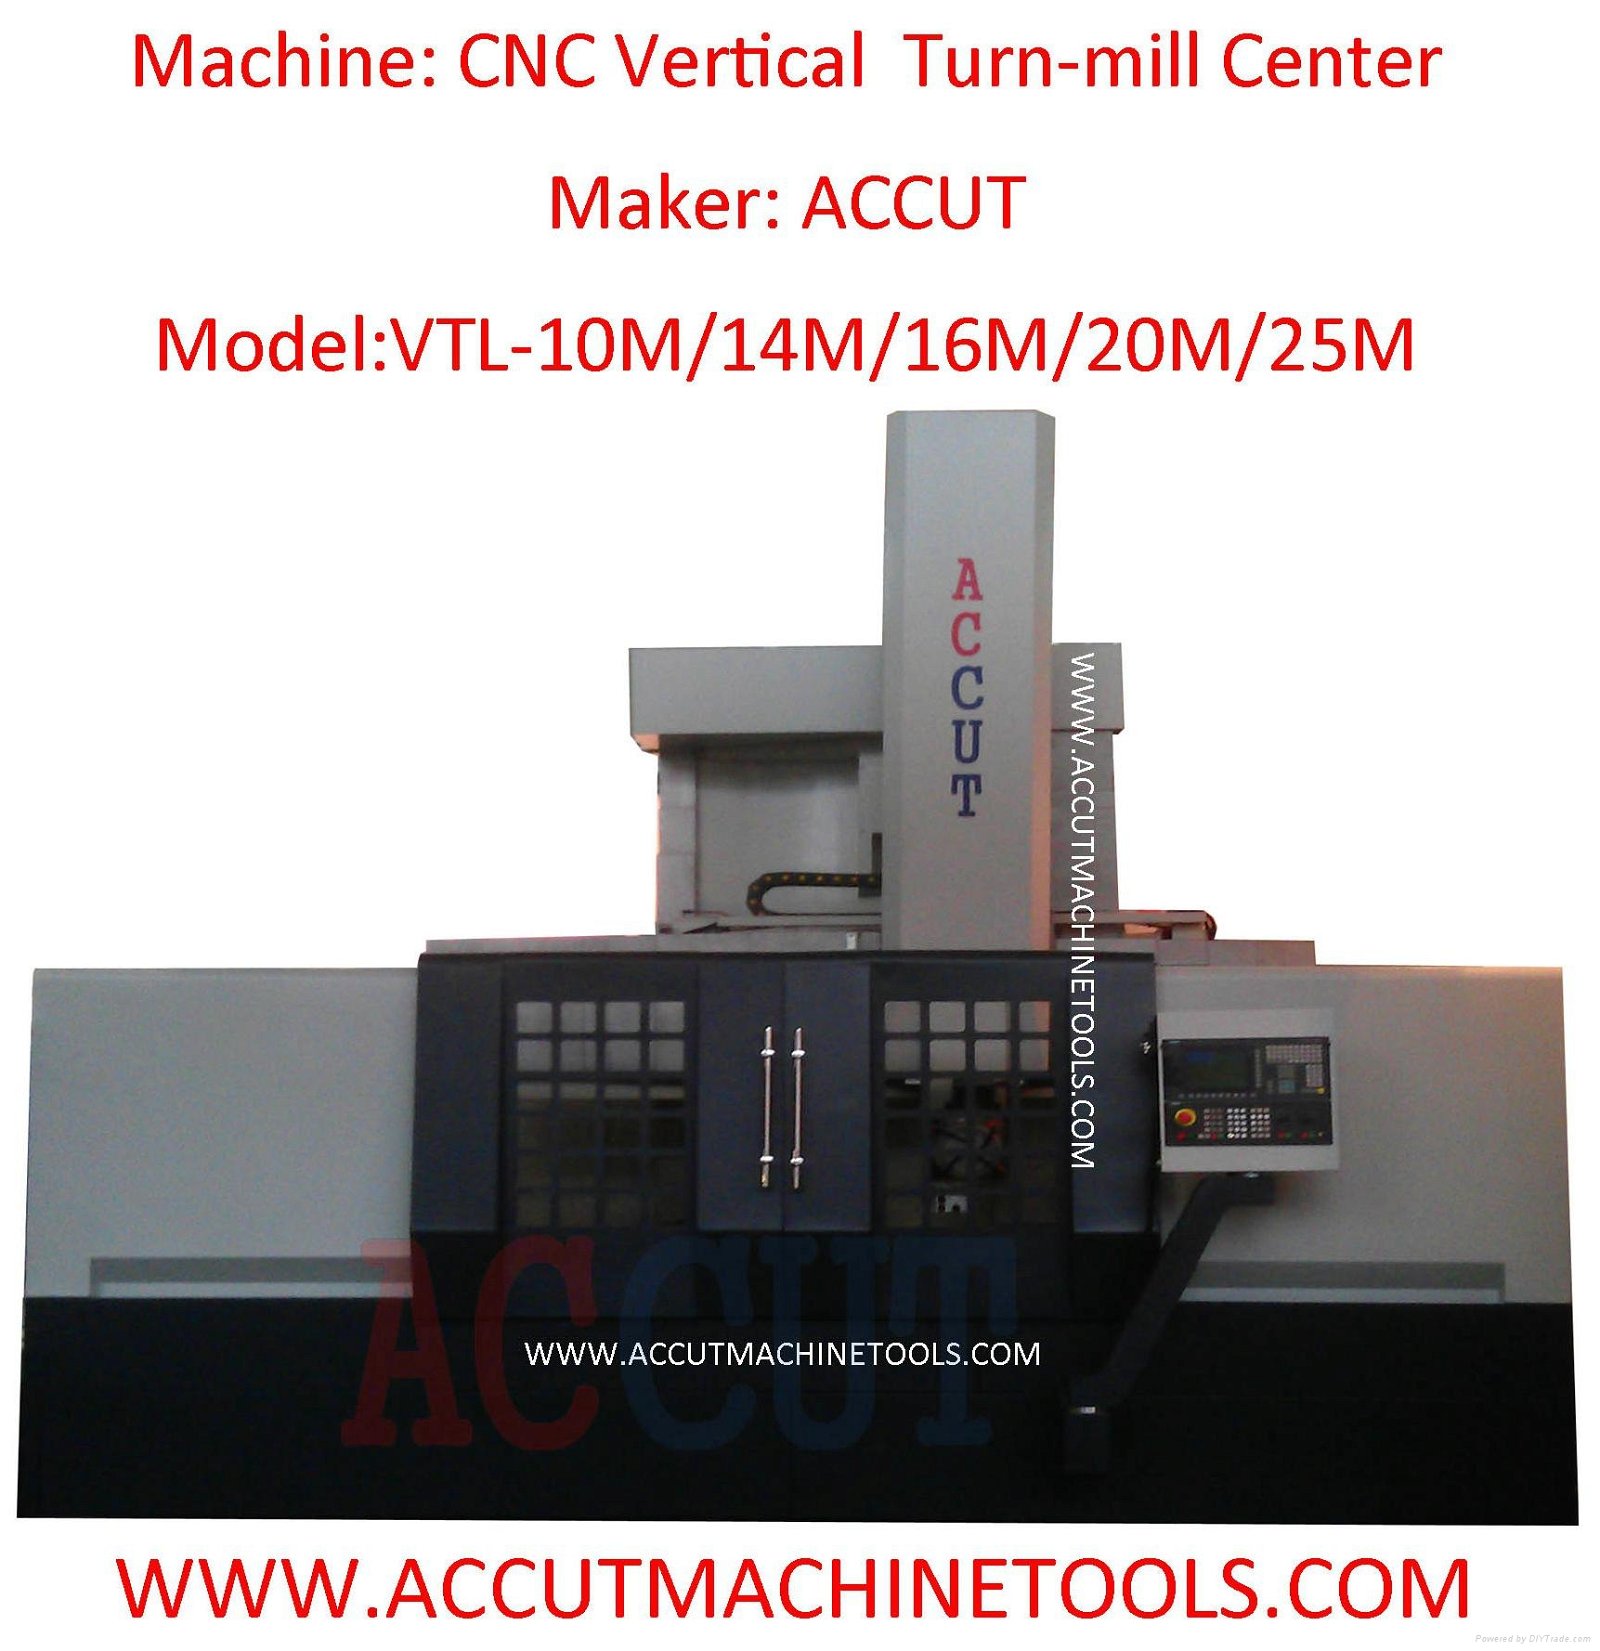 Vertical turning mill, CNC VTL with C axis